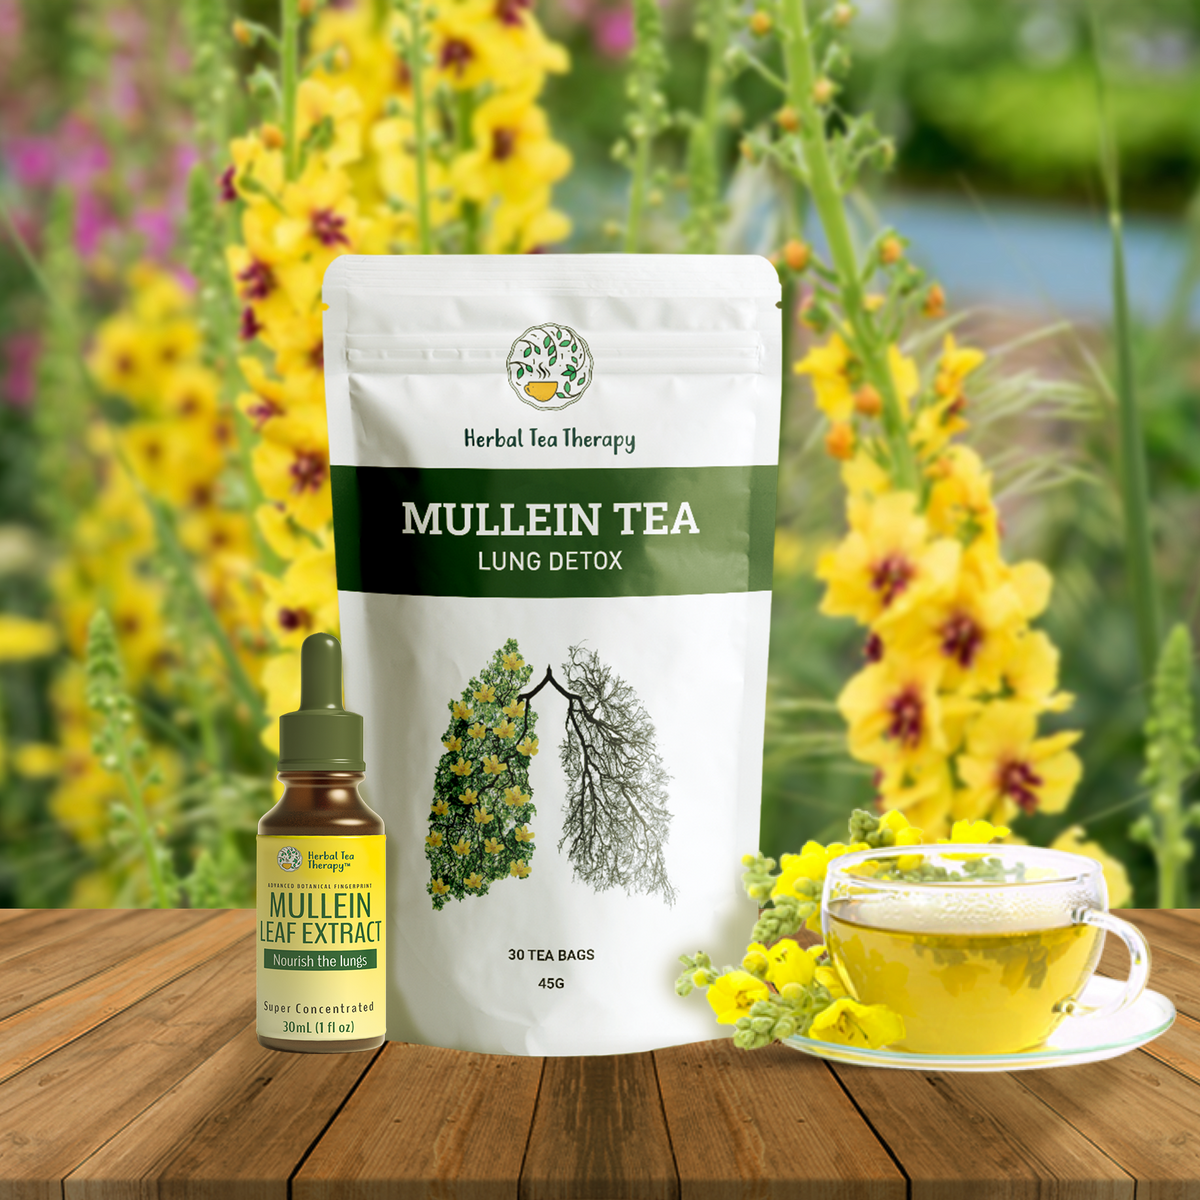 Mullein Extract And Mullein Tea Lung Detox